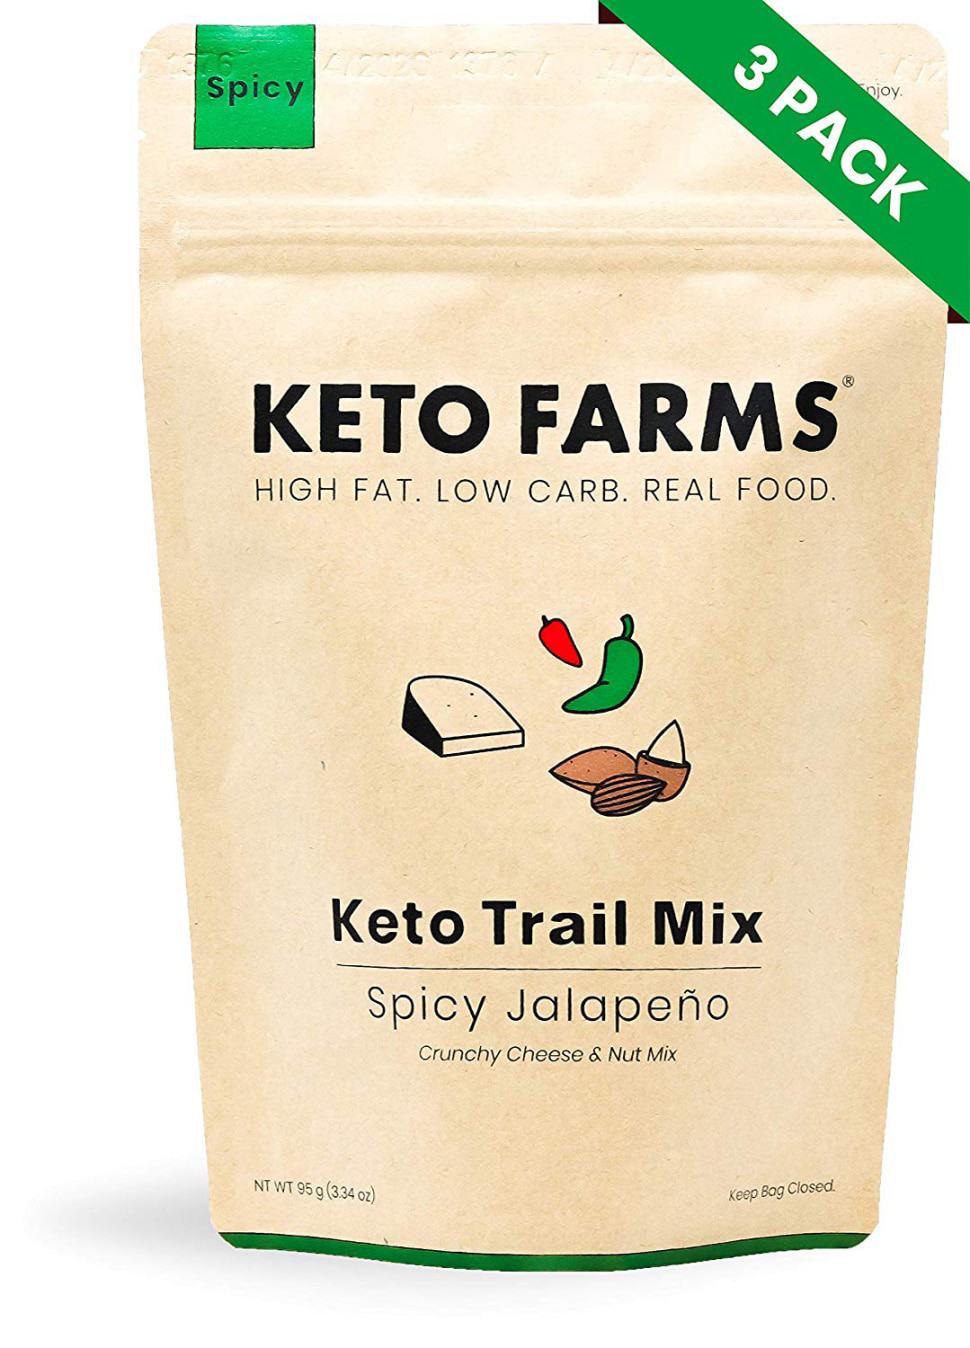 Amazing Keto Trail Mix: Low in net carbs and high in fat